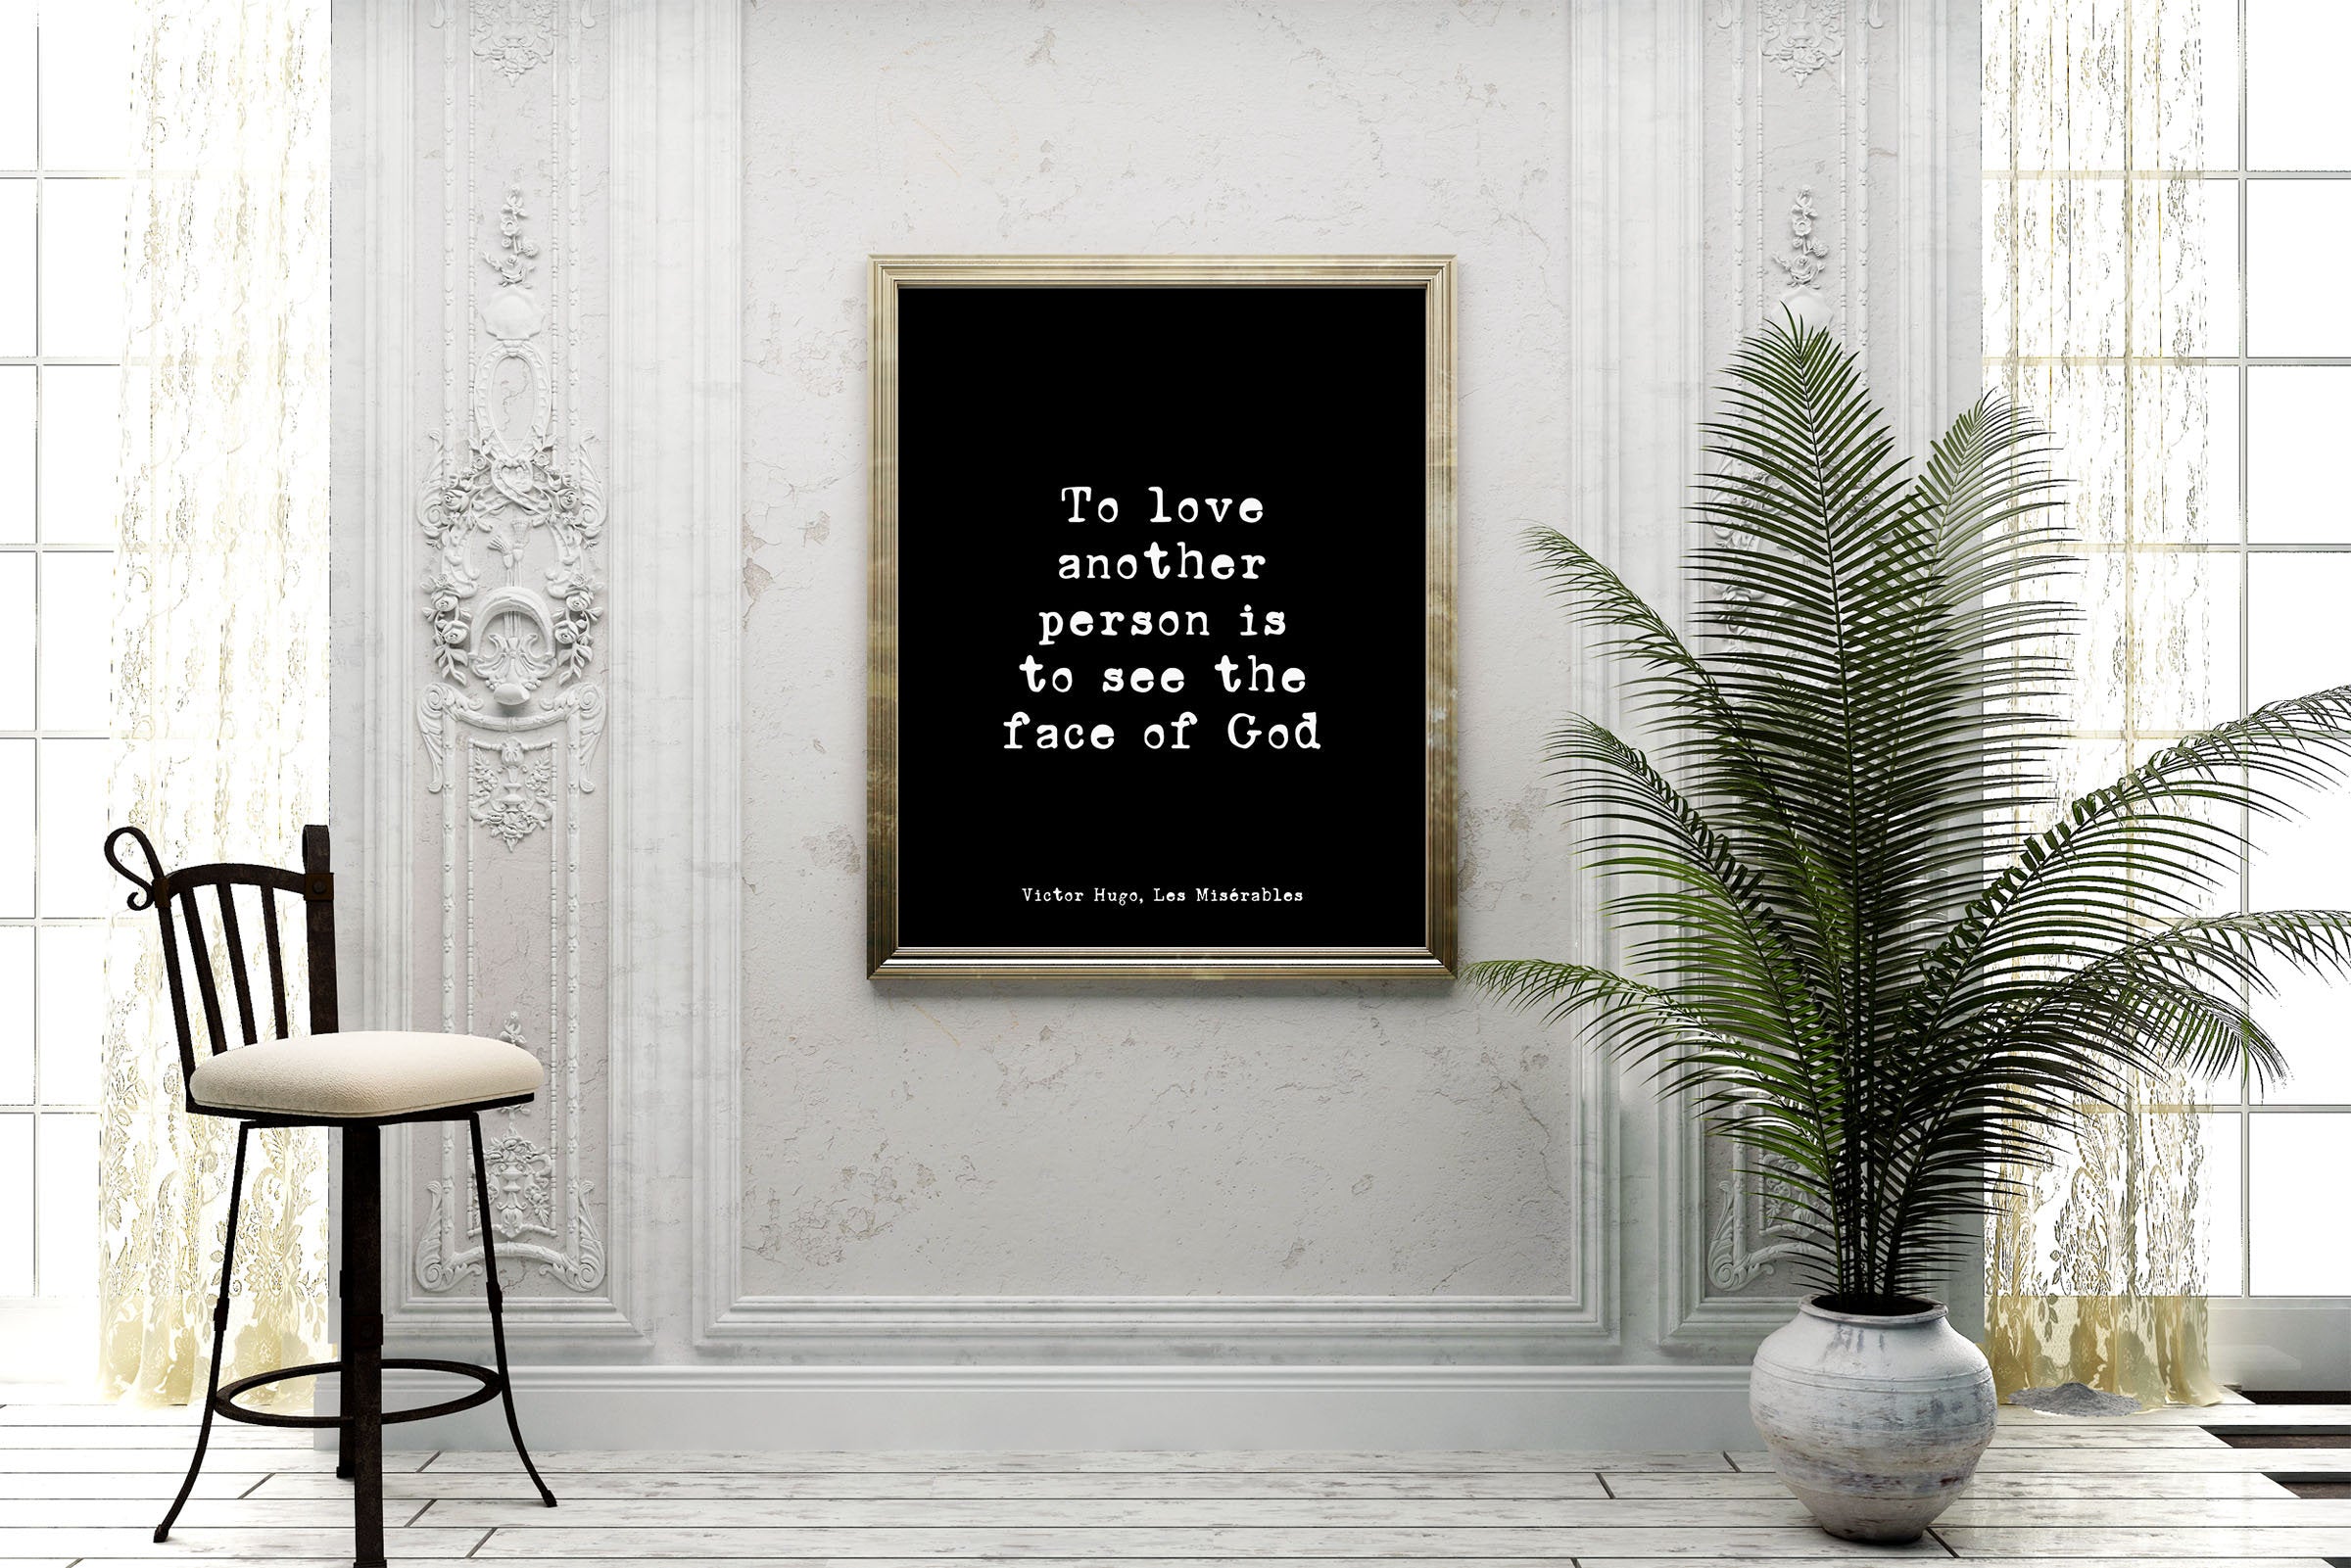 Victor Hugo Quote from Les Miserables, Love Quote Anniversary Gift Idea